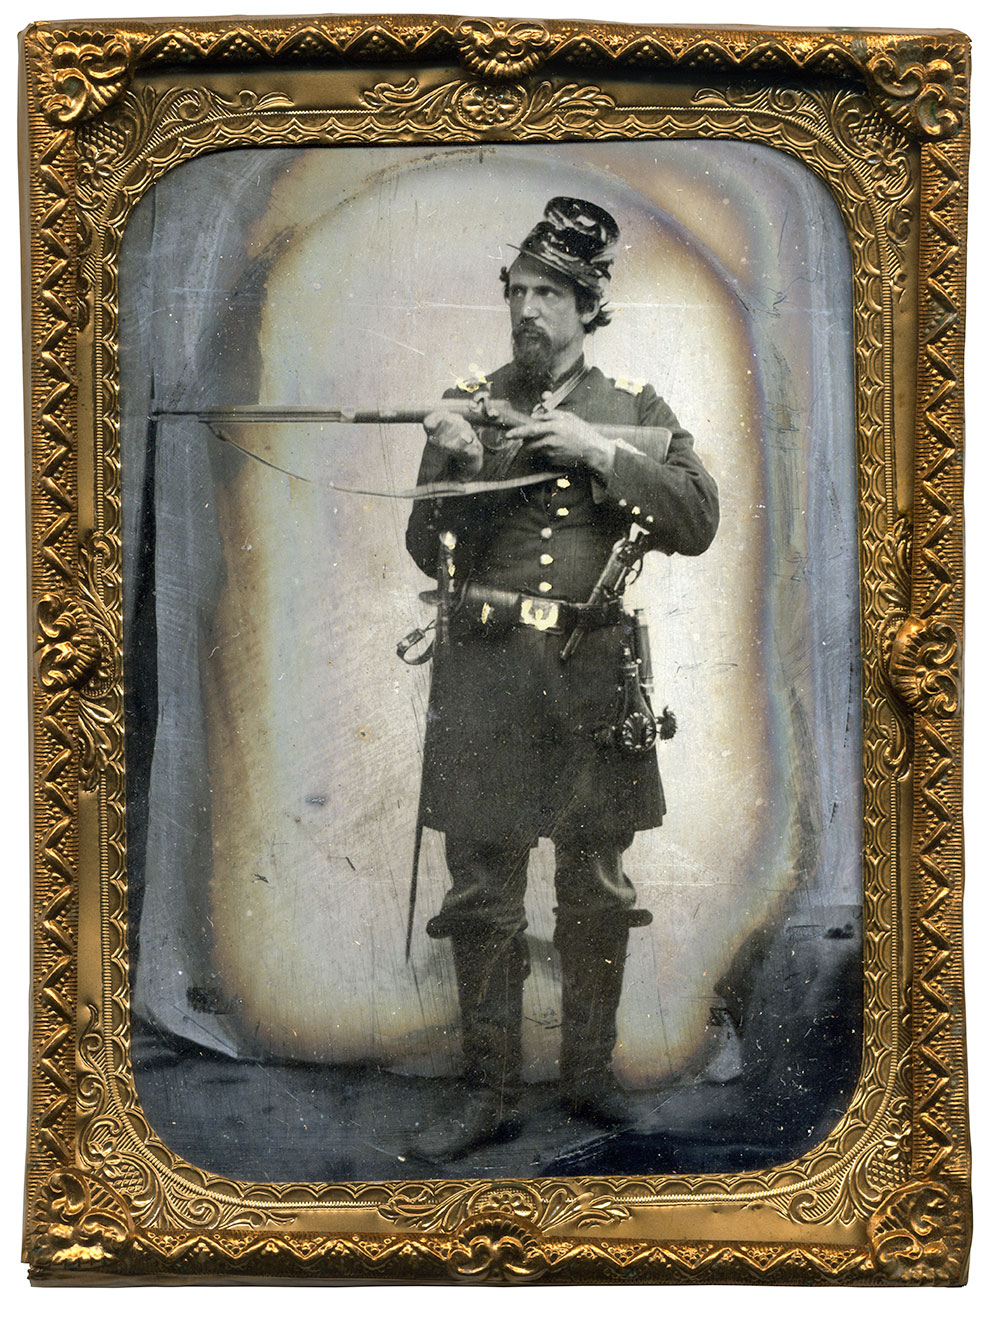 Quarter-plate tintype by an anonymous photographer.